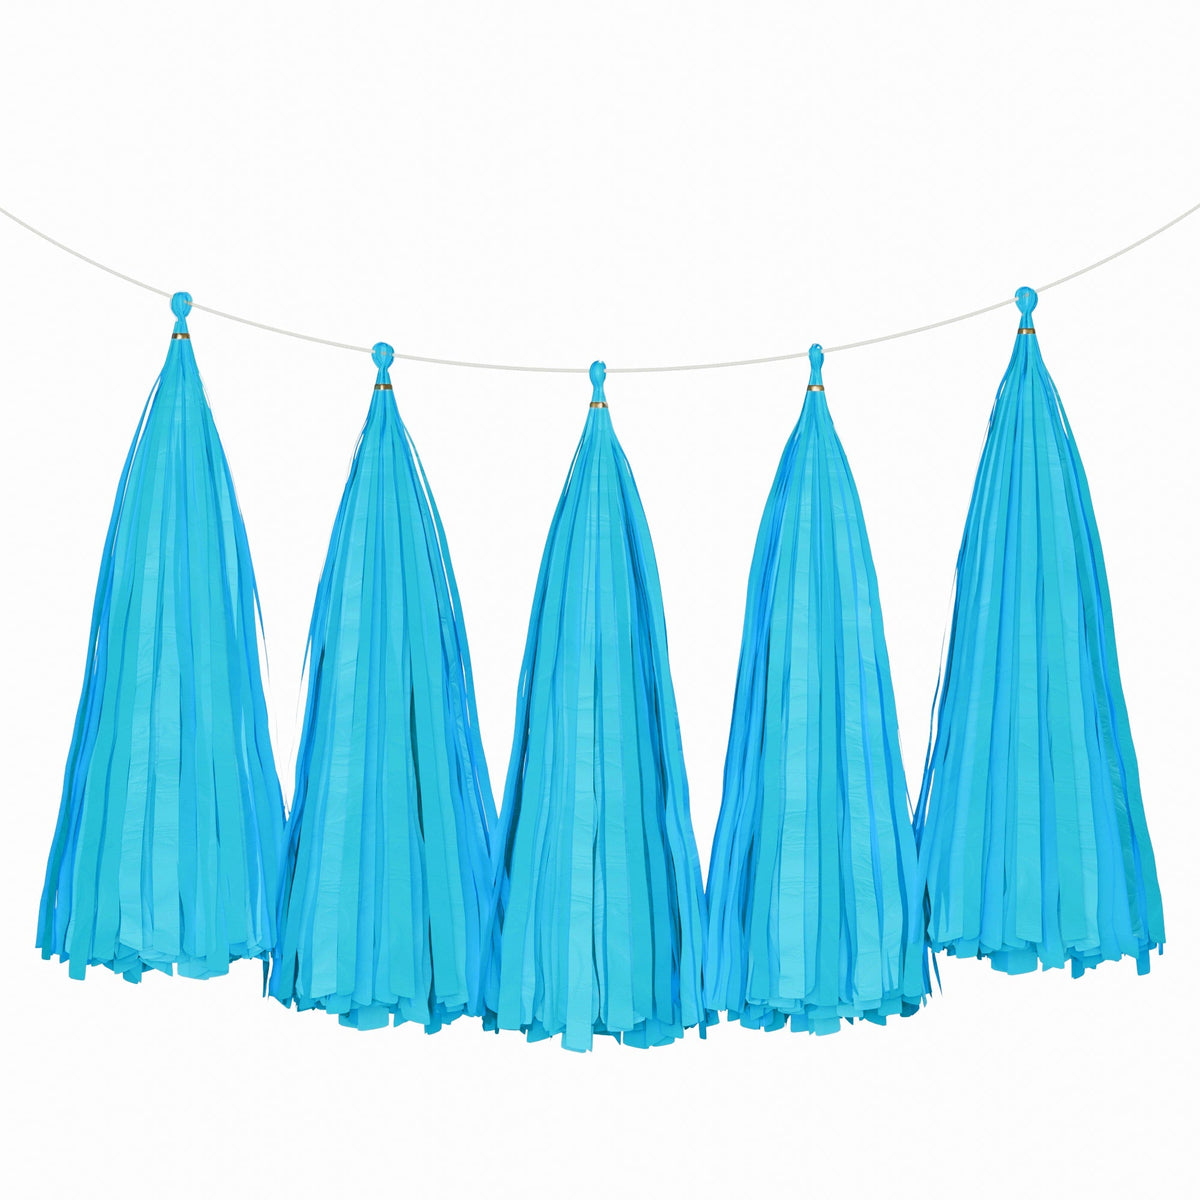 Weifang Mayshine Imp&exp co Decorations Turquoise Blue Tassel Garland, 5 Count 810064197130